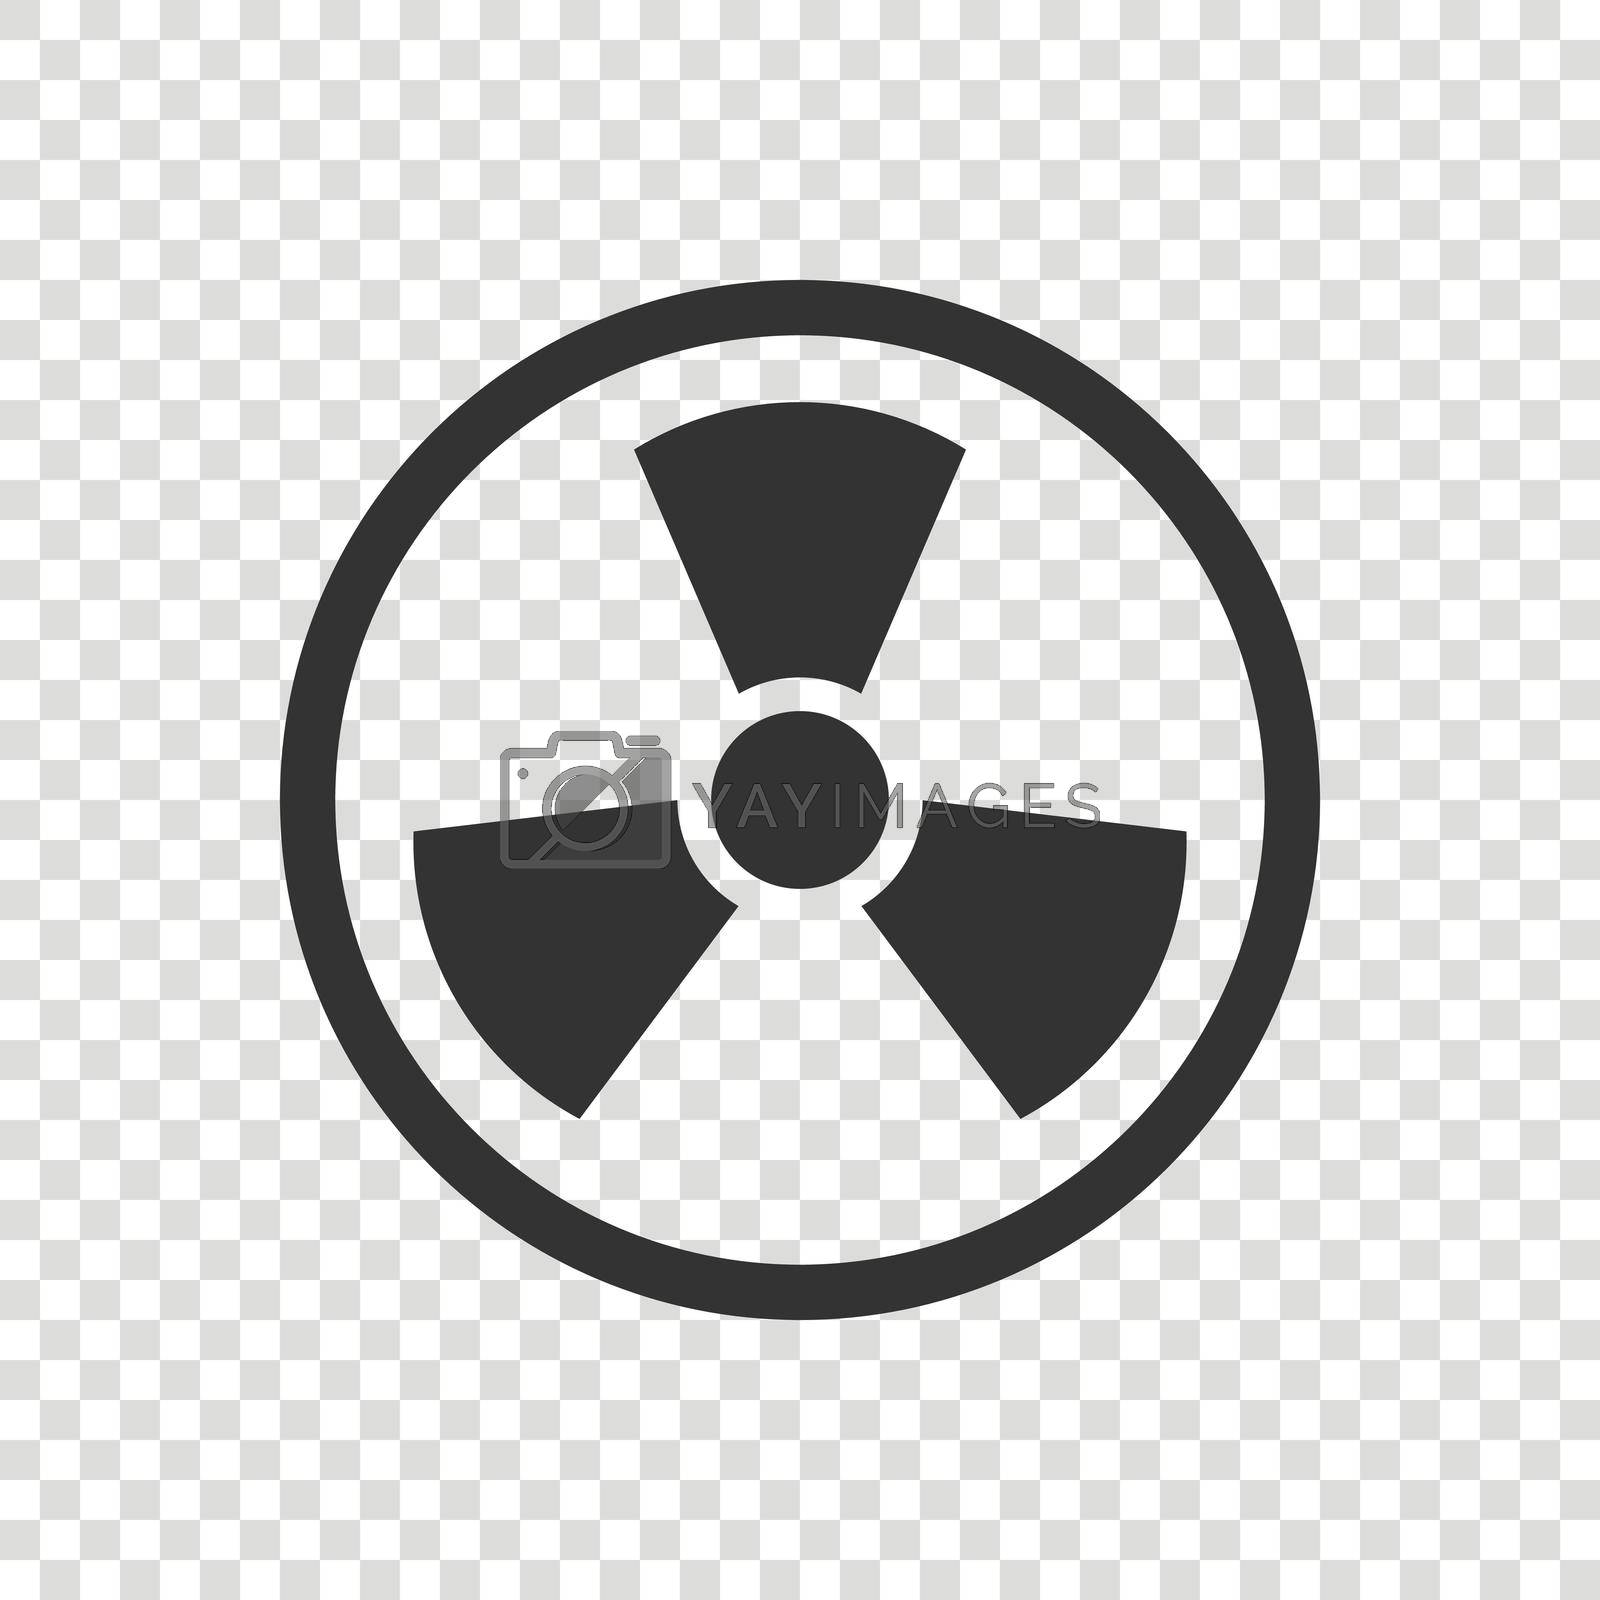 Royalty free image of Nuclear radiation icon in flat style. Radioactivity vector illustration on white isolated background. Toxic sign business concept. by LysenkoA